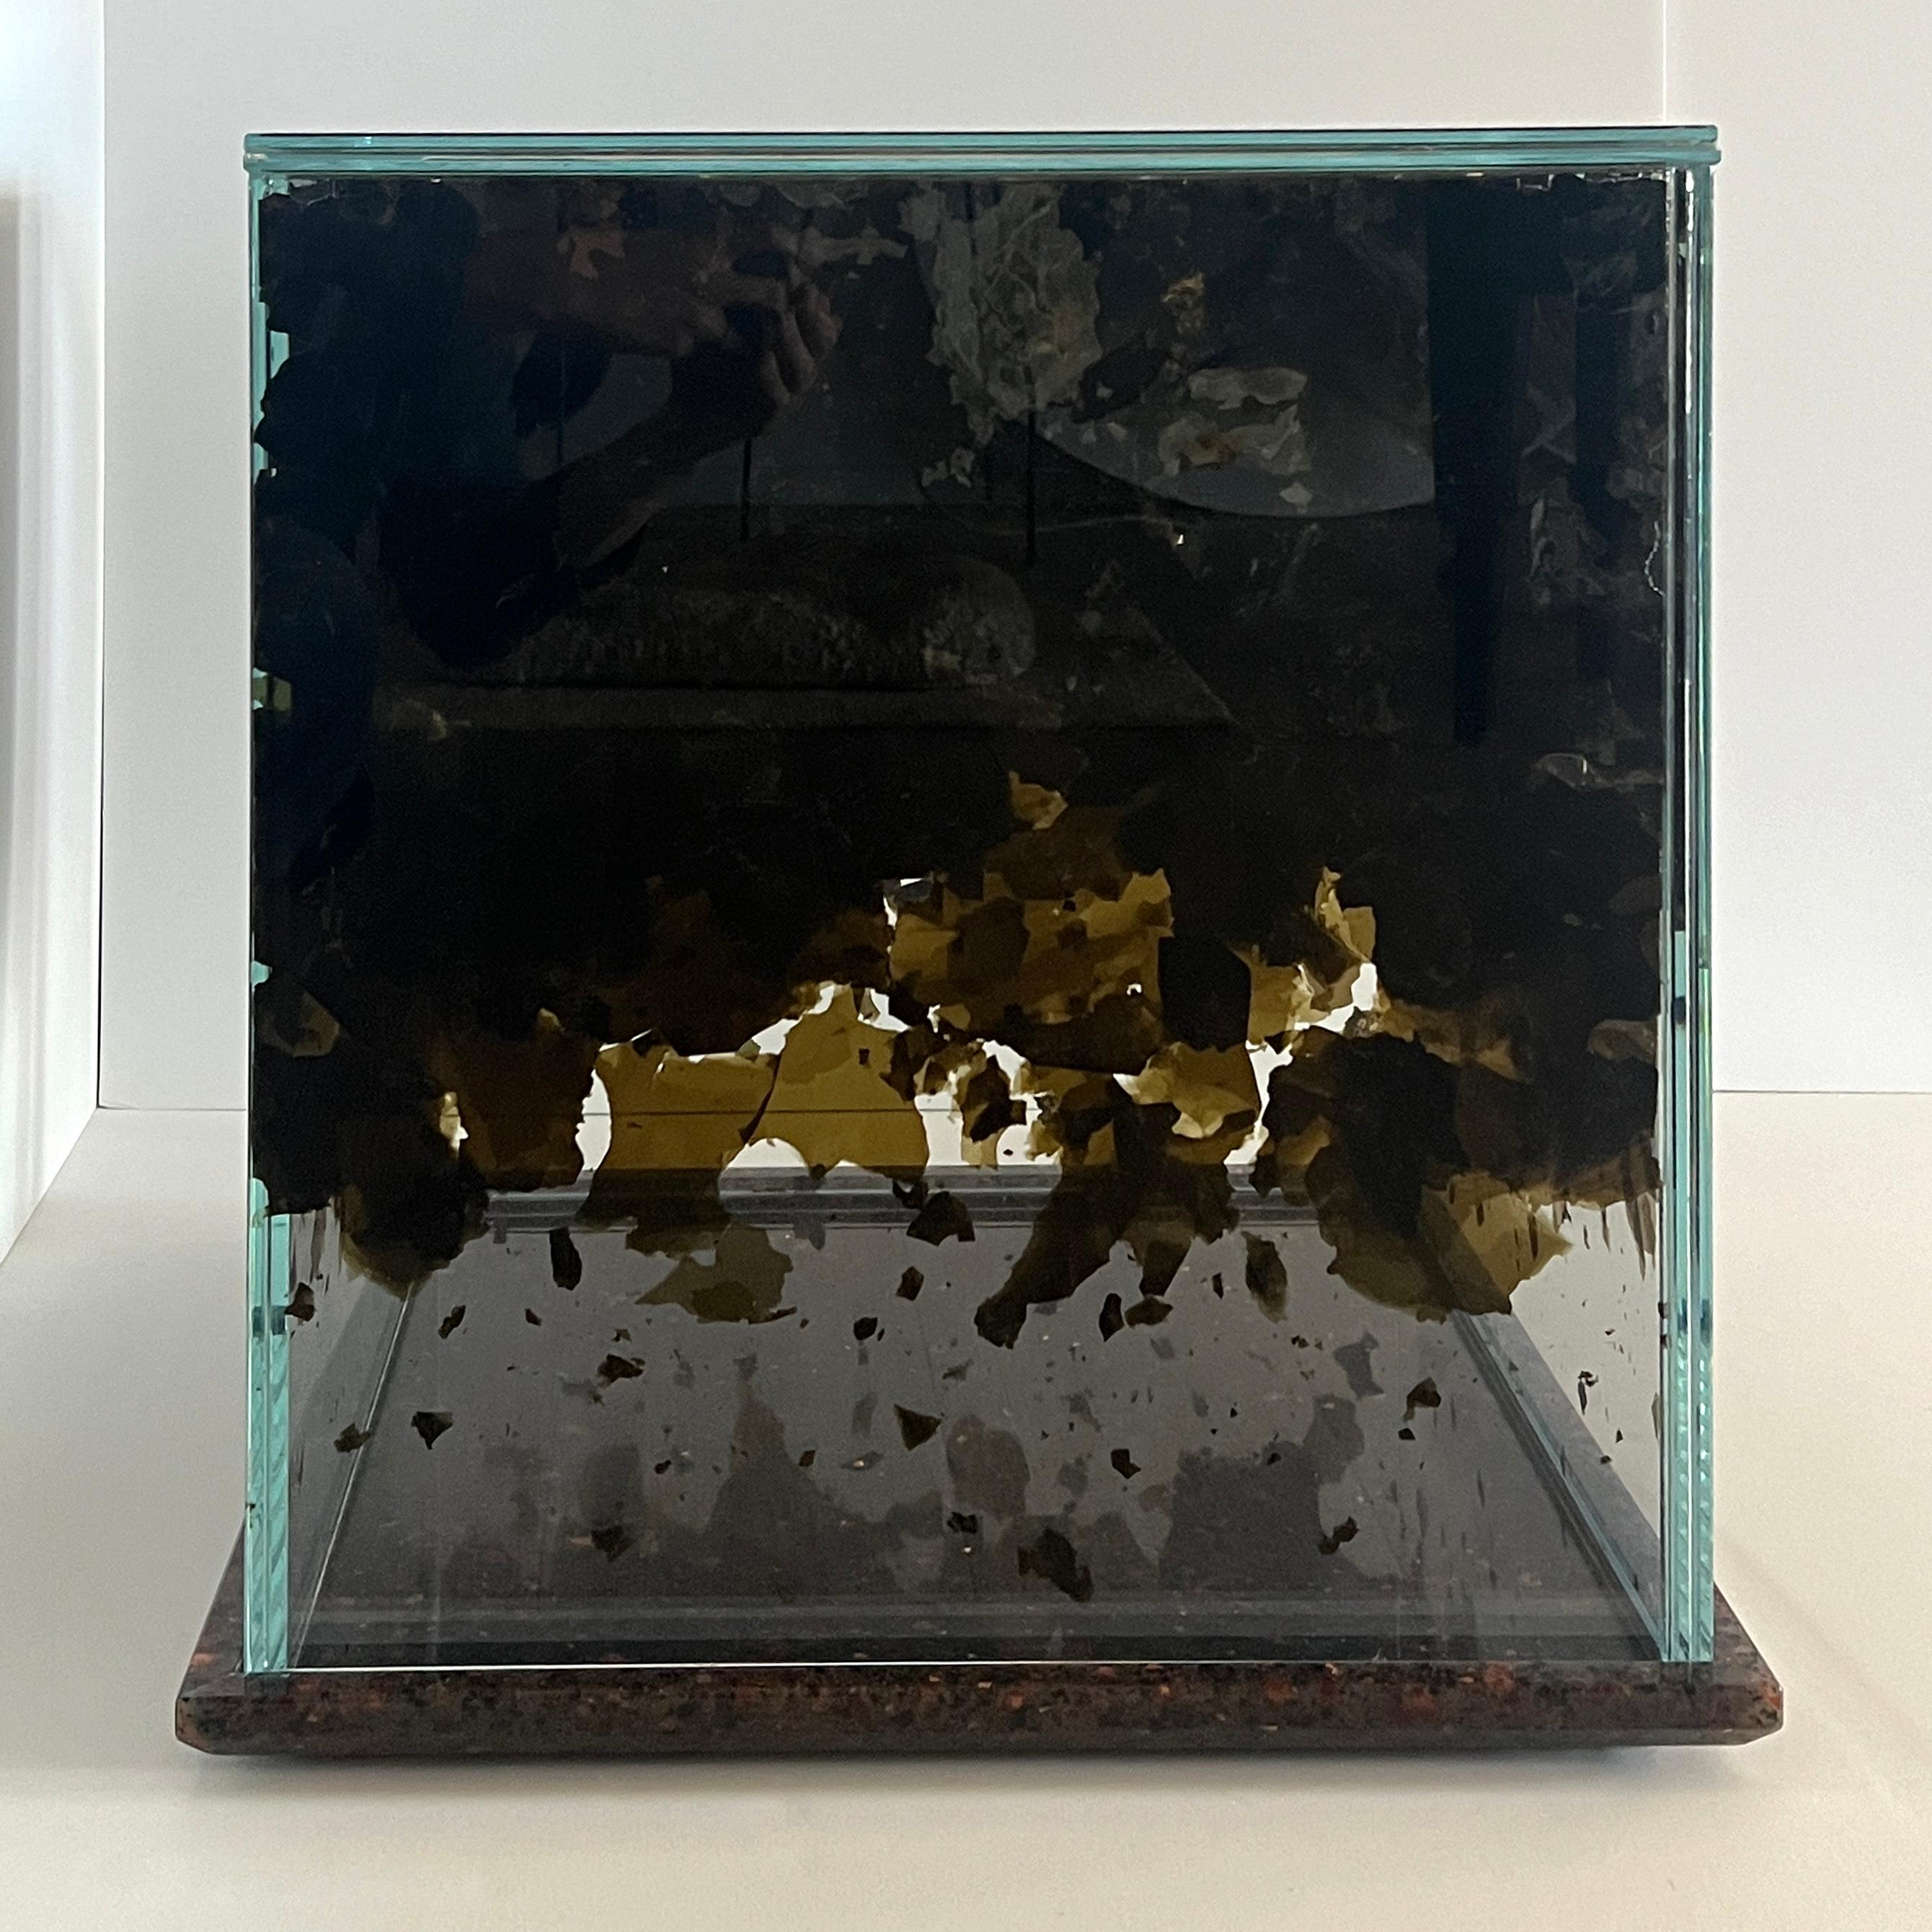 INTERMICA (CAUSEWAY)
SIDE TABLE, 2023

InterMica® glass: Laminated Starphire glass with black mica flakes; 
Base: Polyester resin panel, 20 x 20 x 20 in.

InterMica is an architectural specialty glass product, crafted from carefully selected flakes